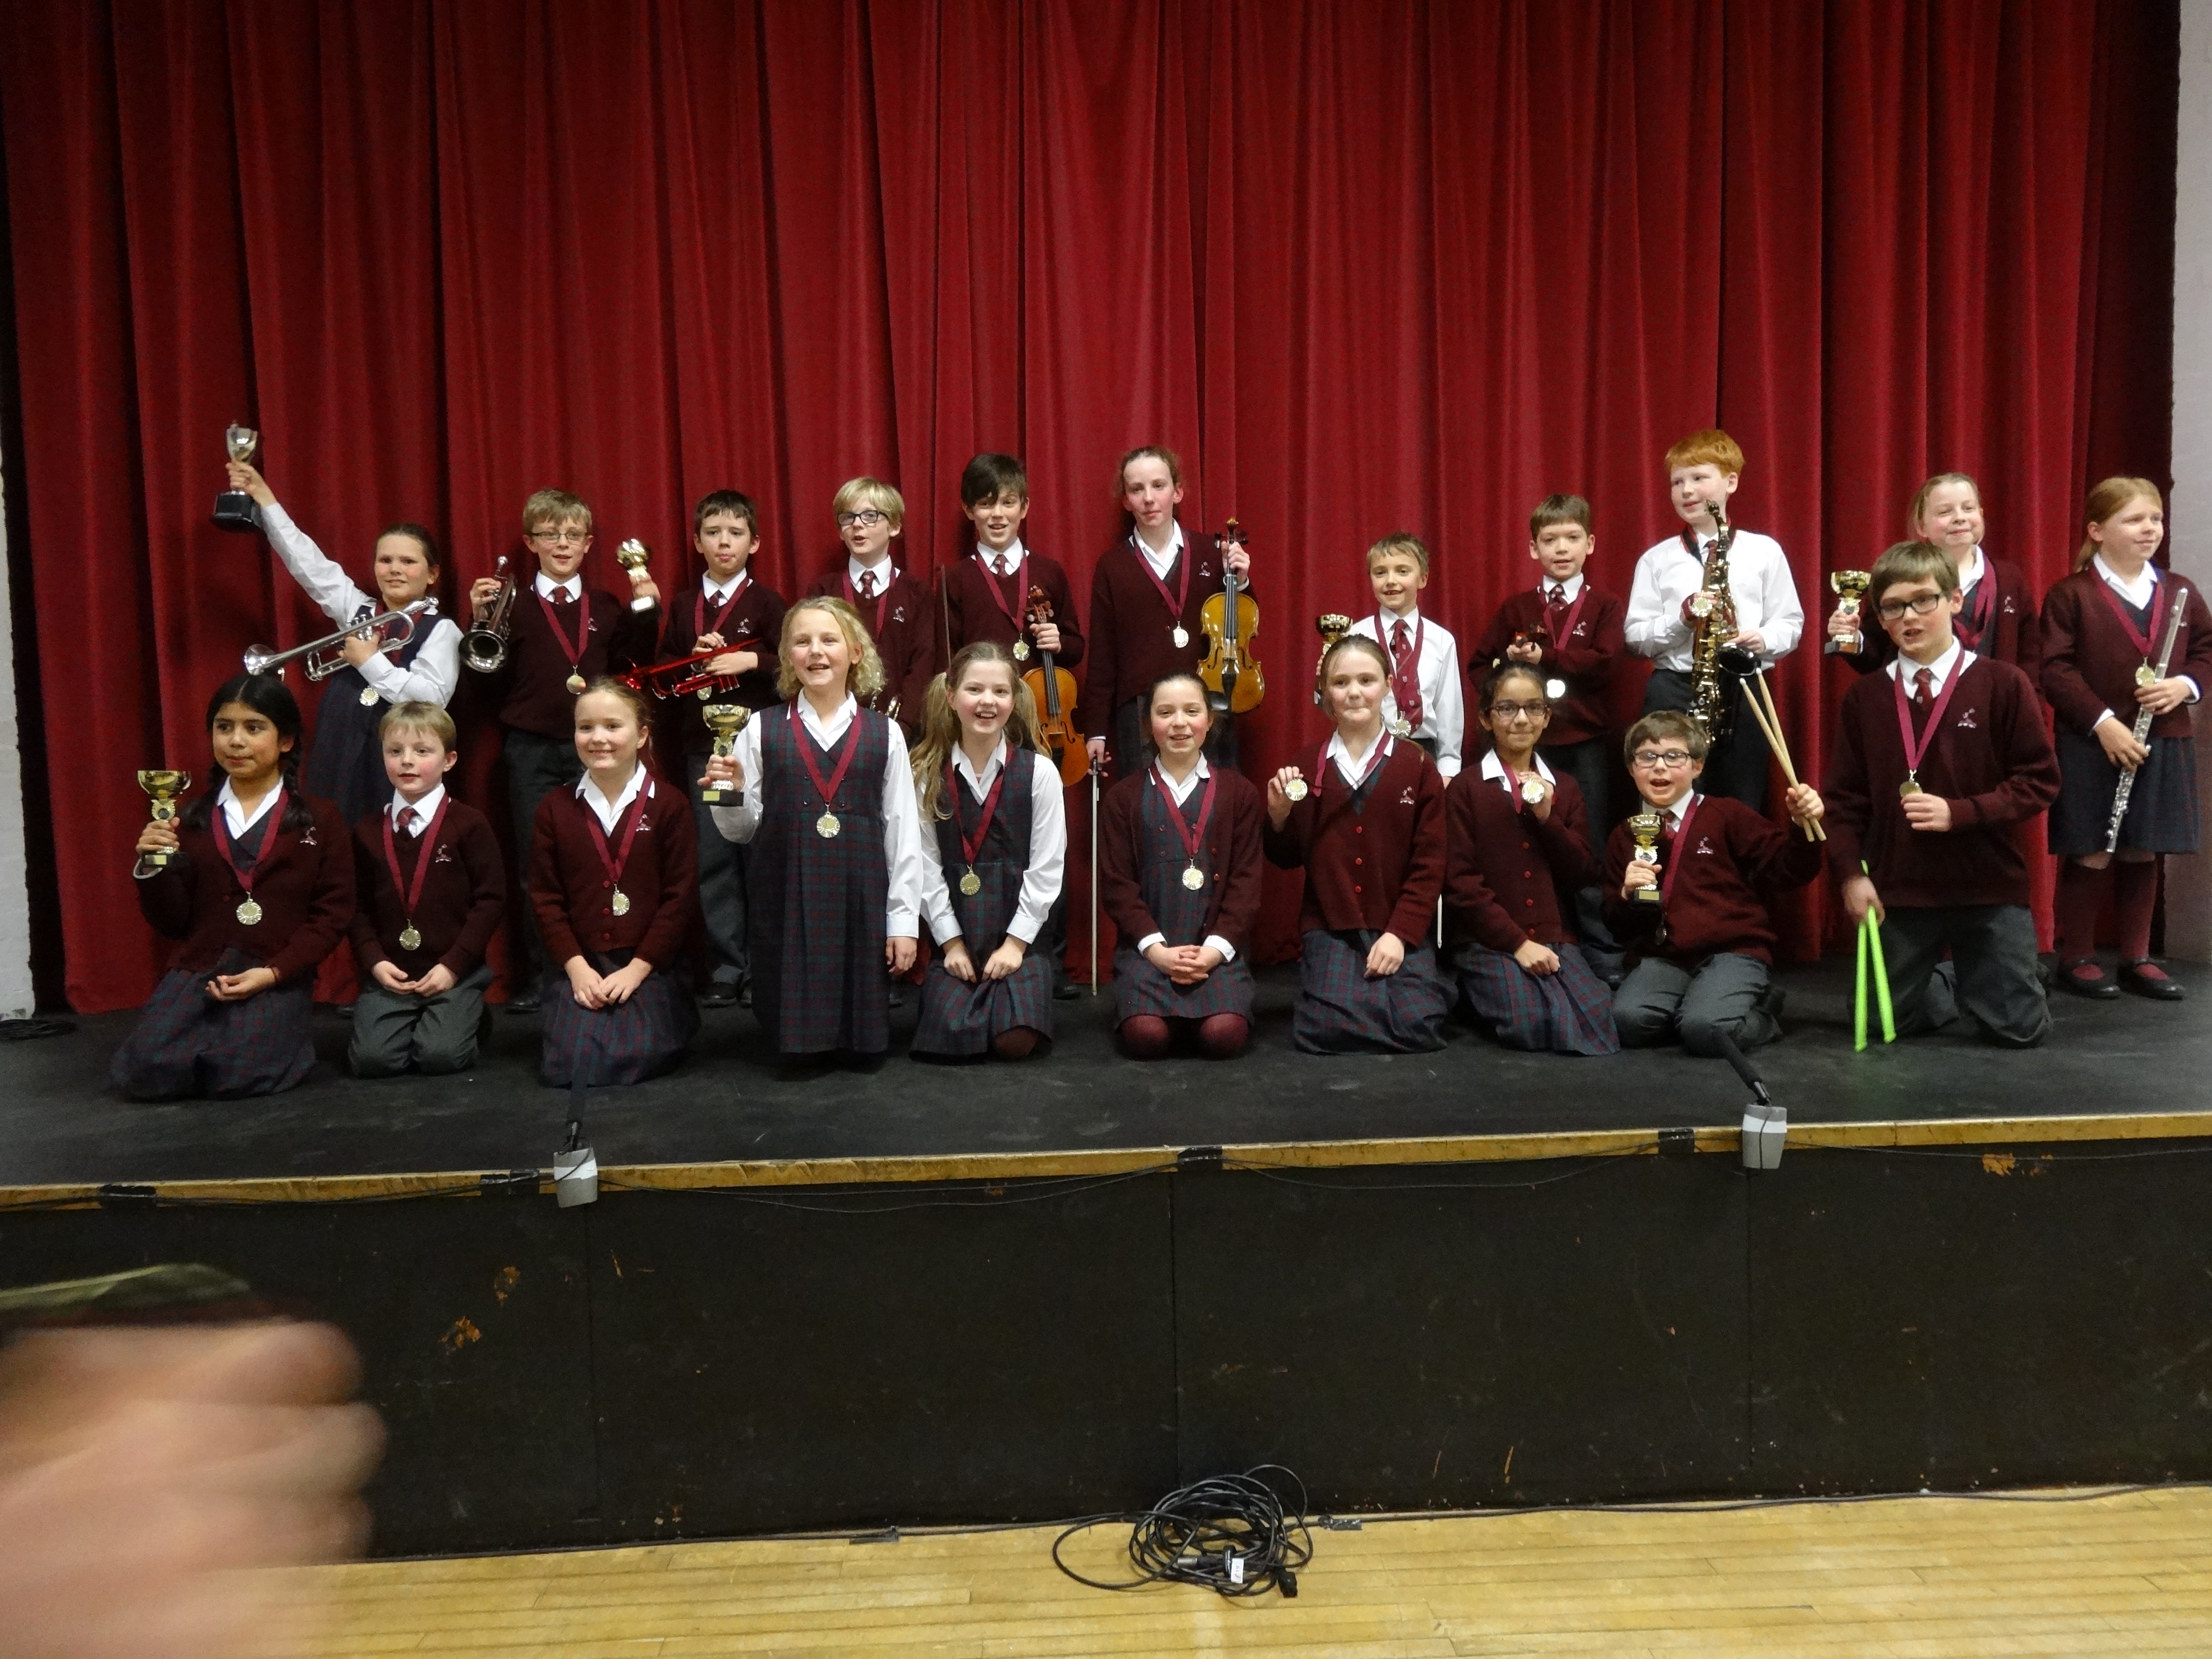 Years 3, 4 and 5 - January 2015